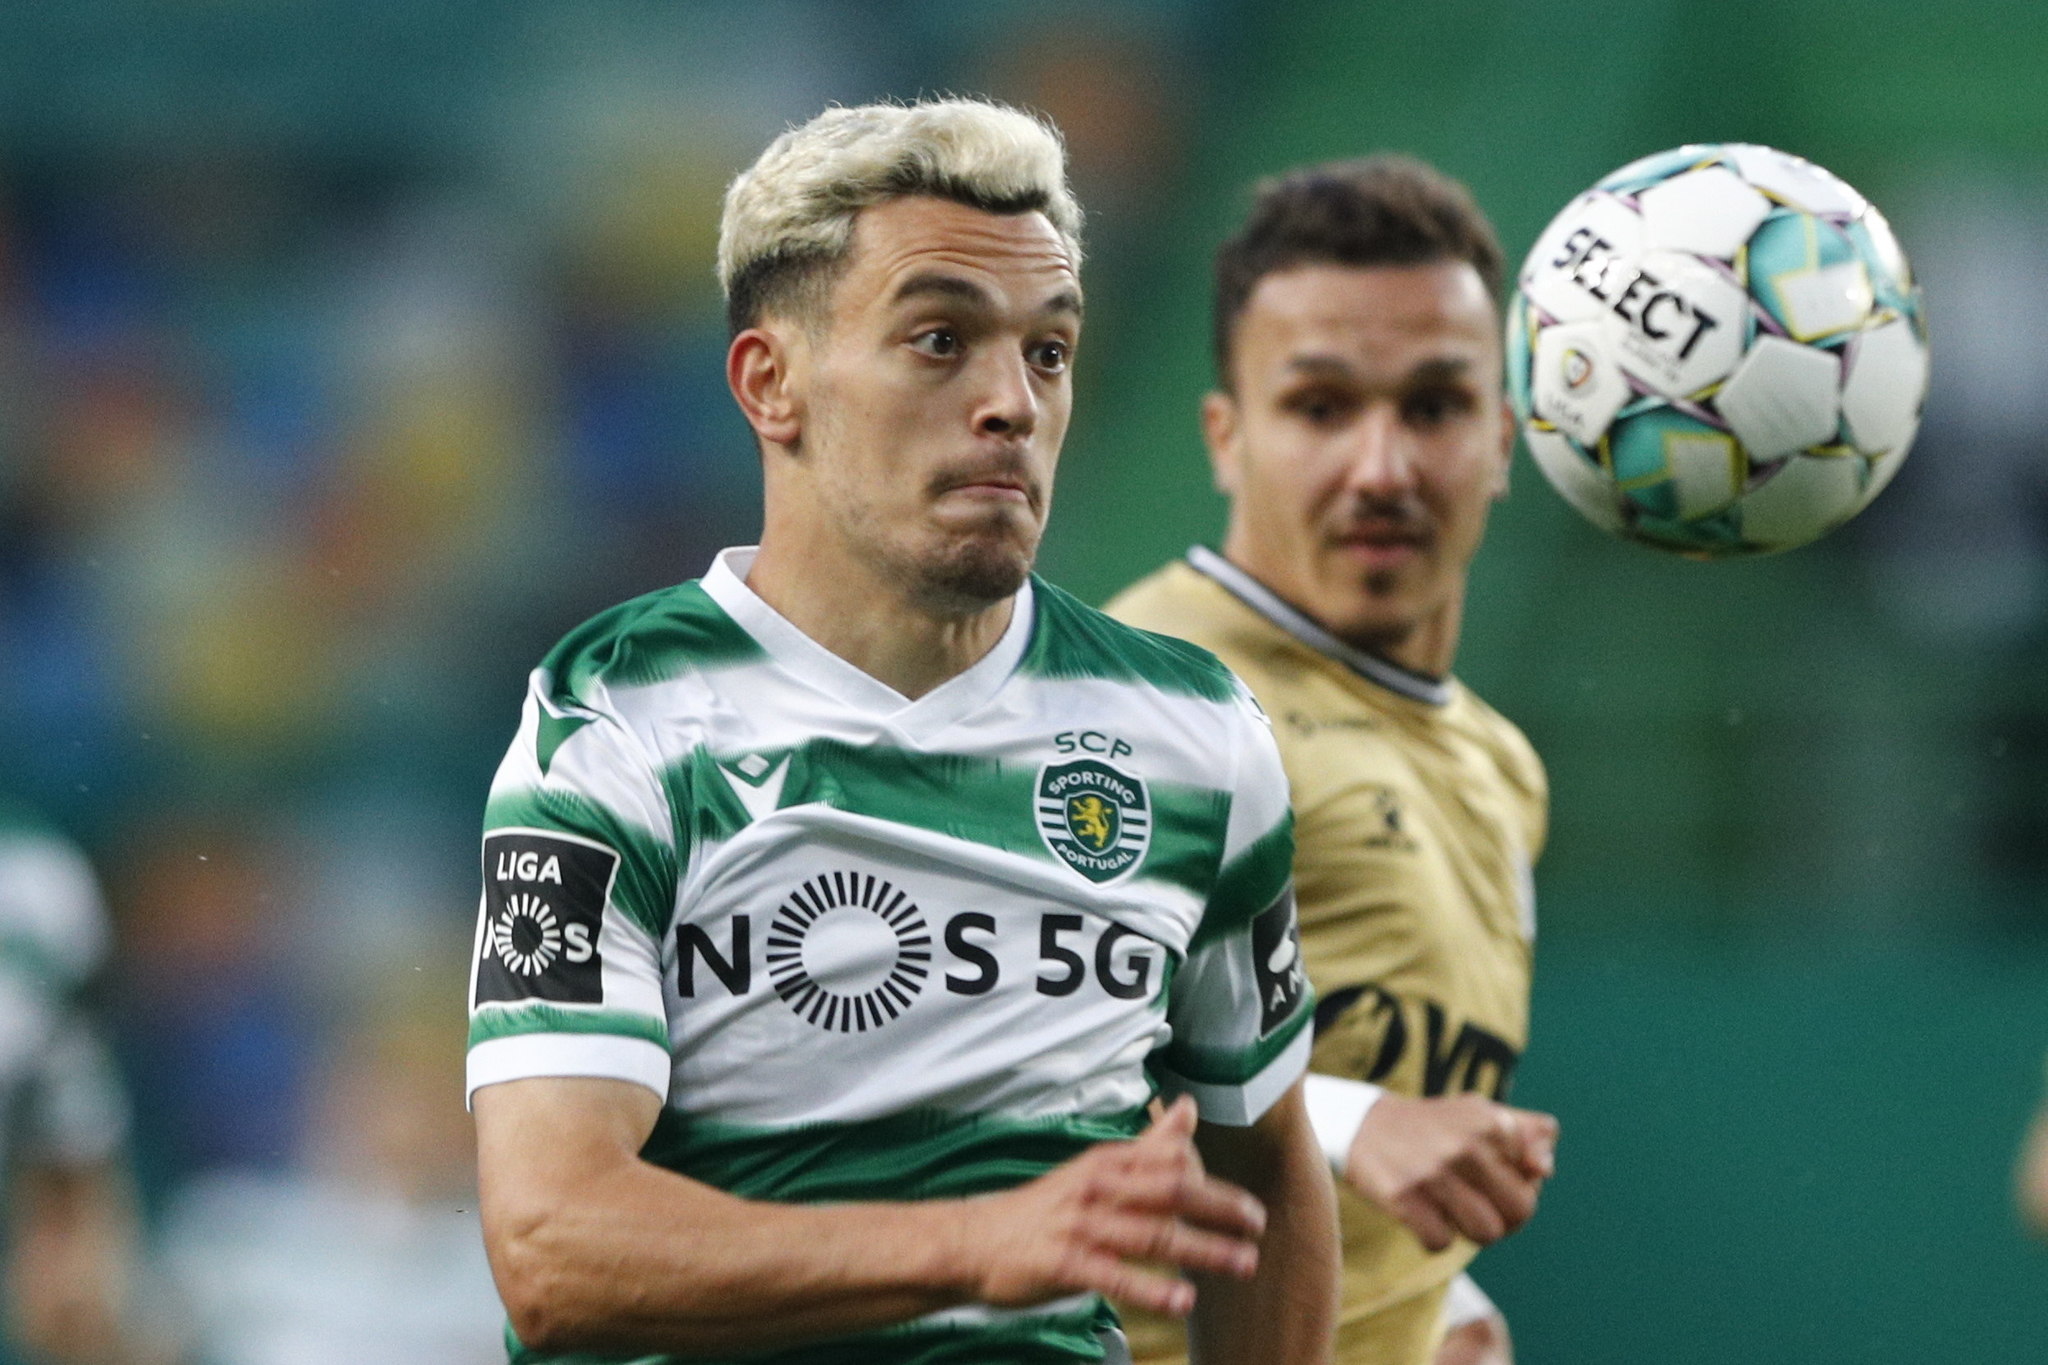 Pedro Goncalves during Sporting's match against Boavista on May 11, 2021.